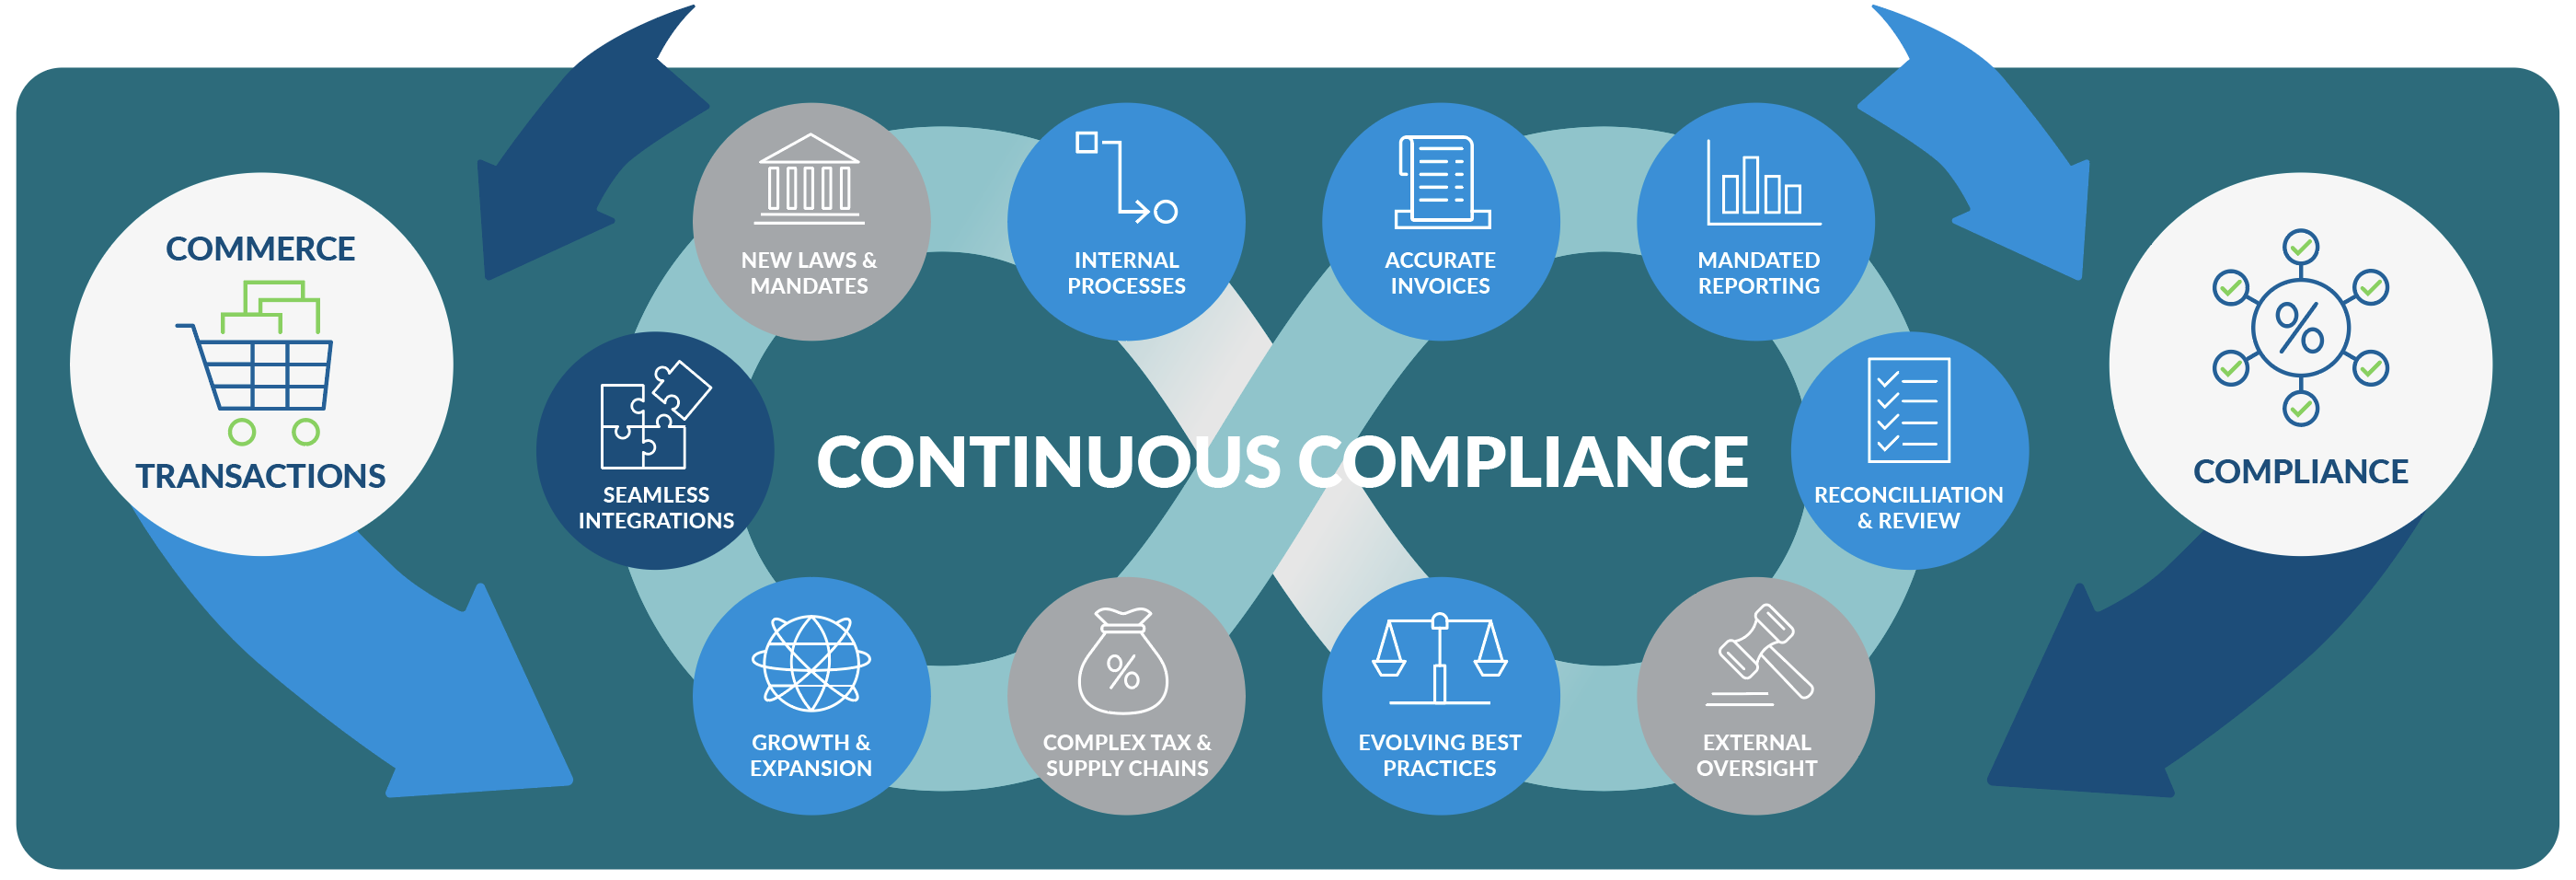 Continuous Compliance pic